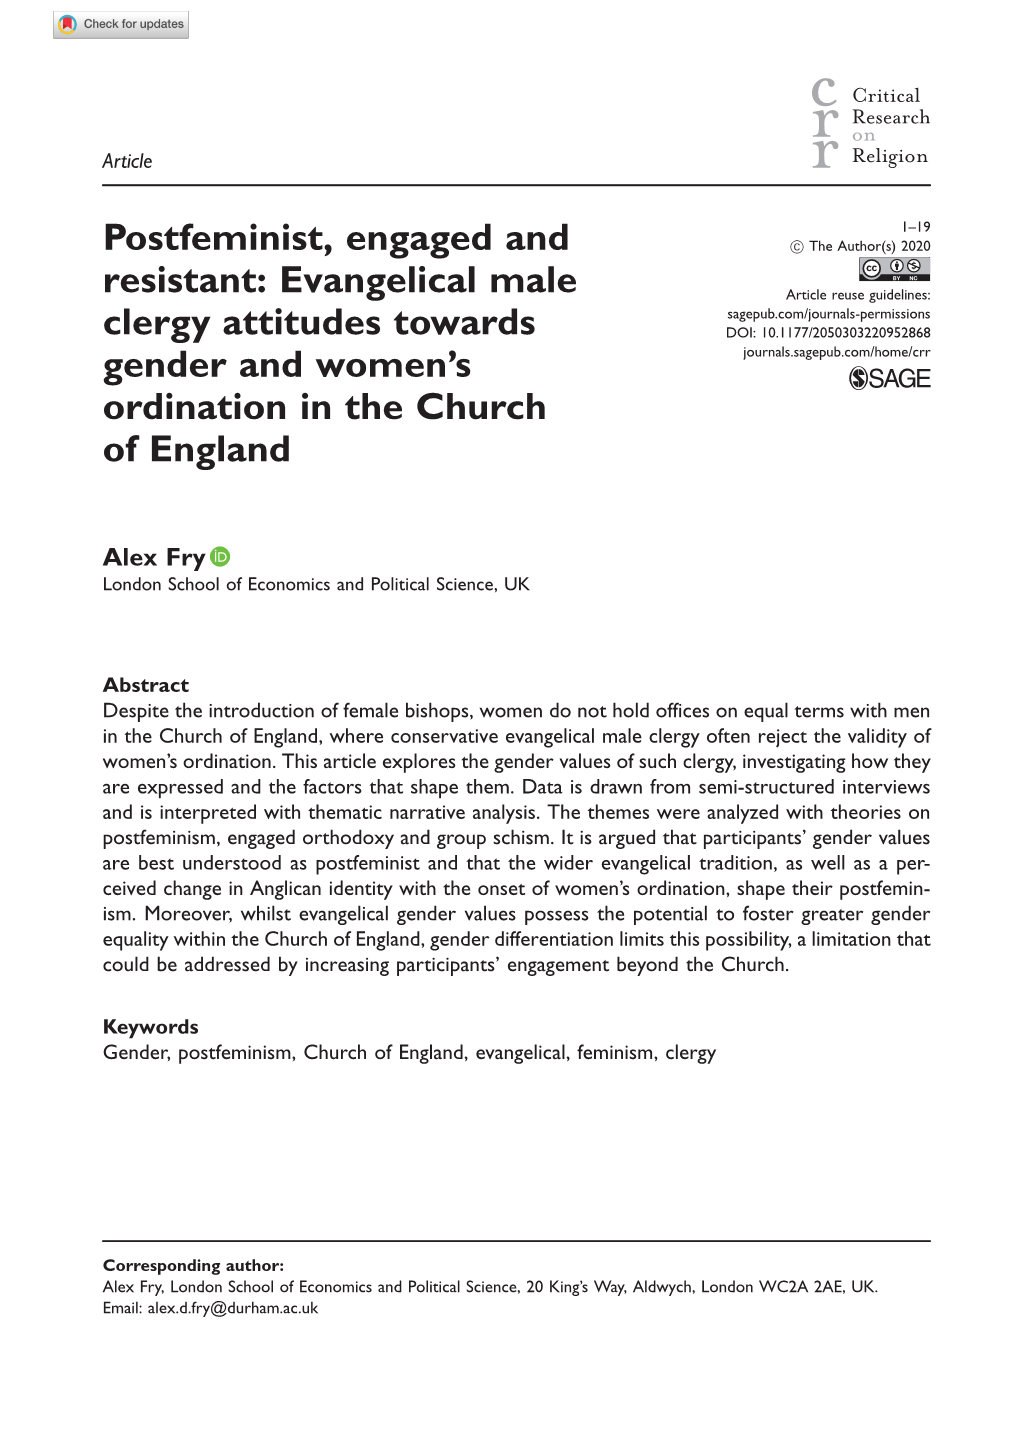 Evangelical Male Clergy Attitudes Towards Gender and Women's